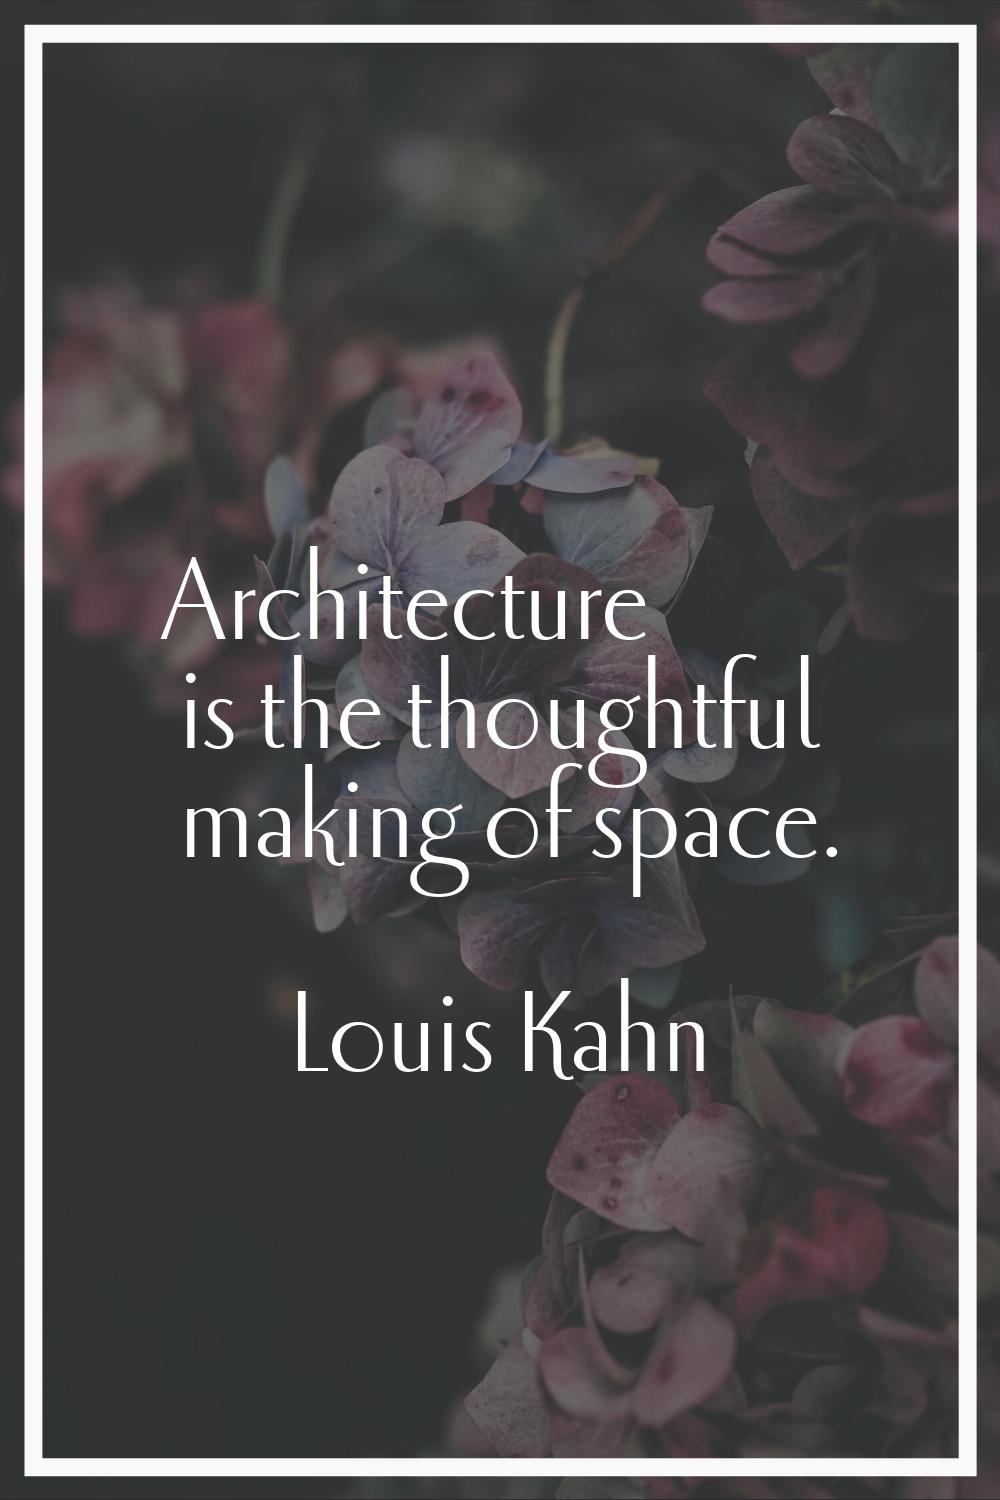 Architecture is the thoughtful making of space.